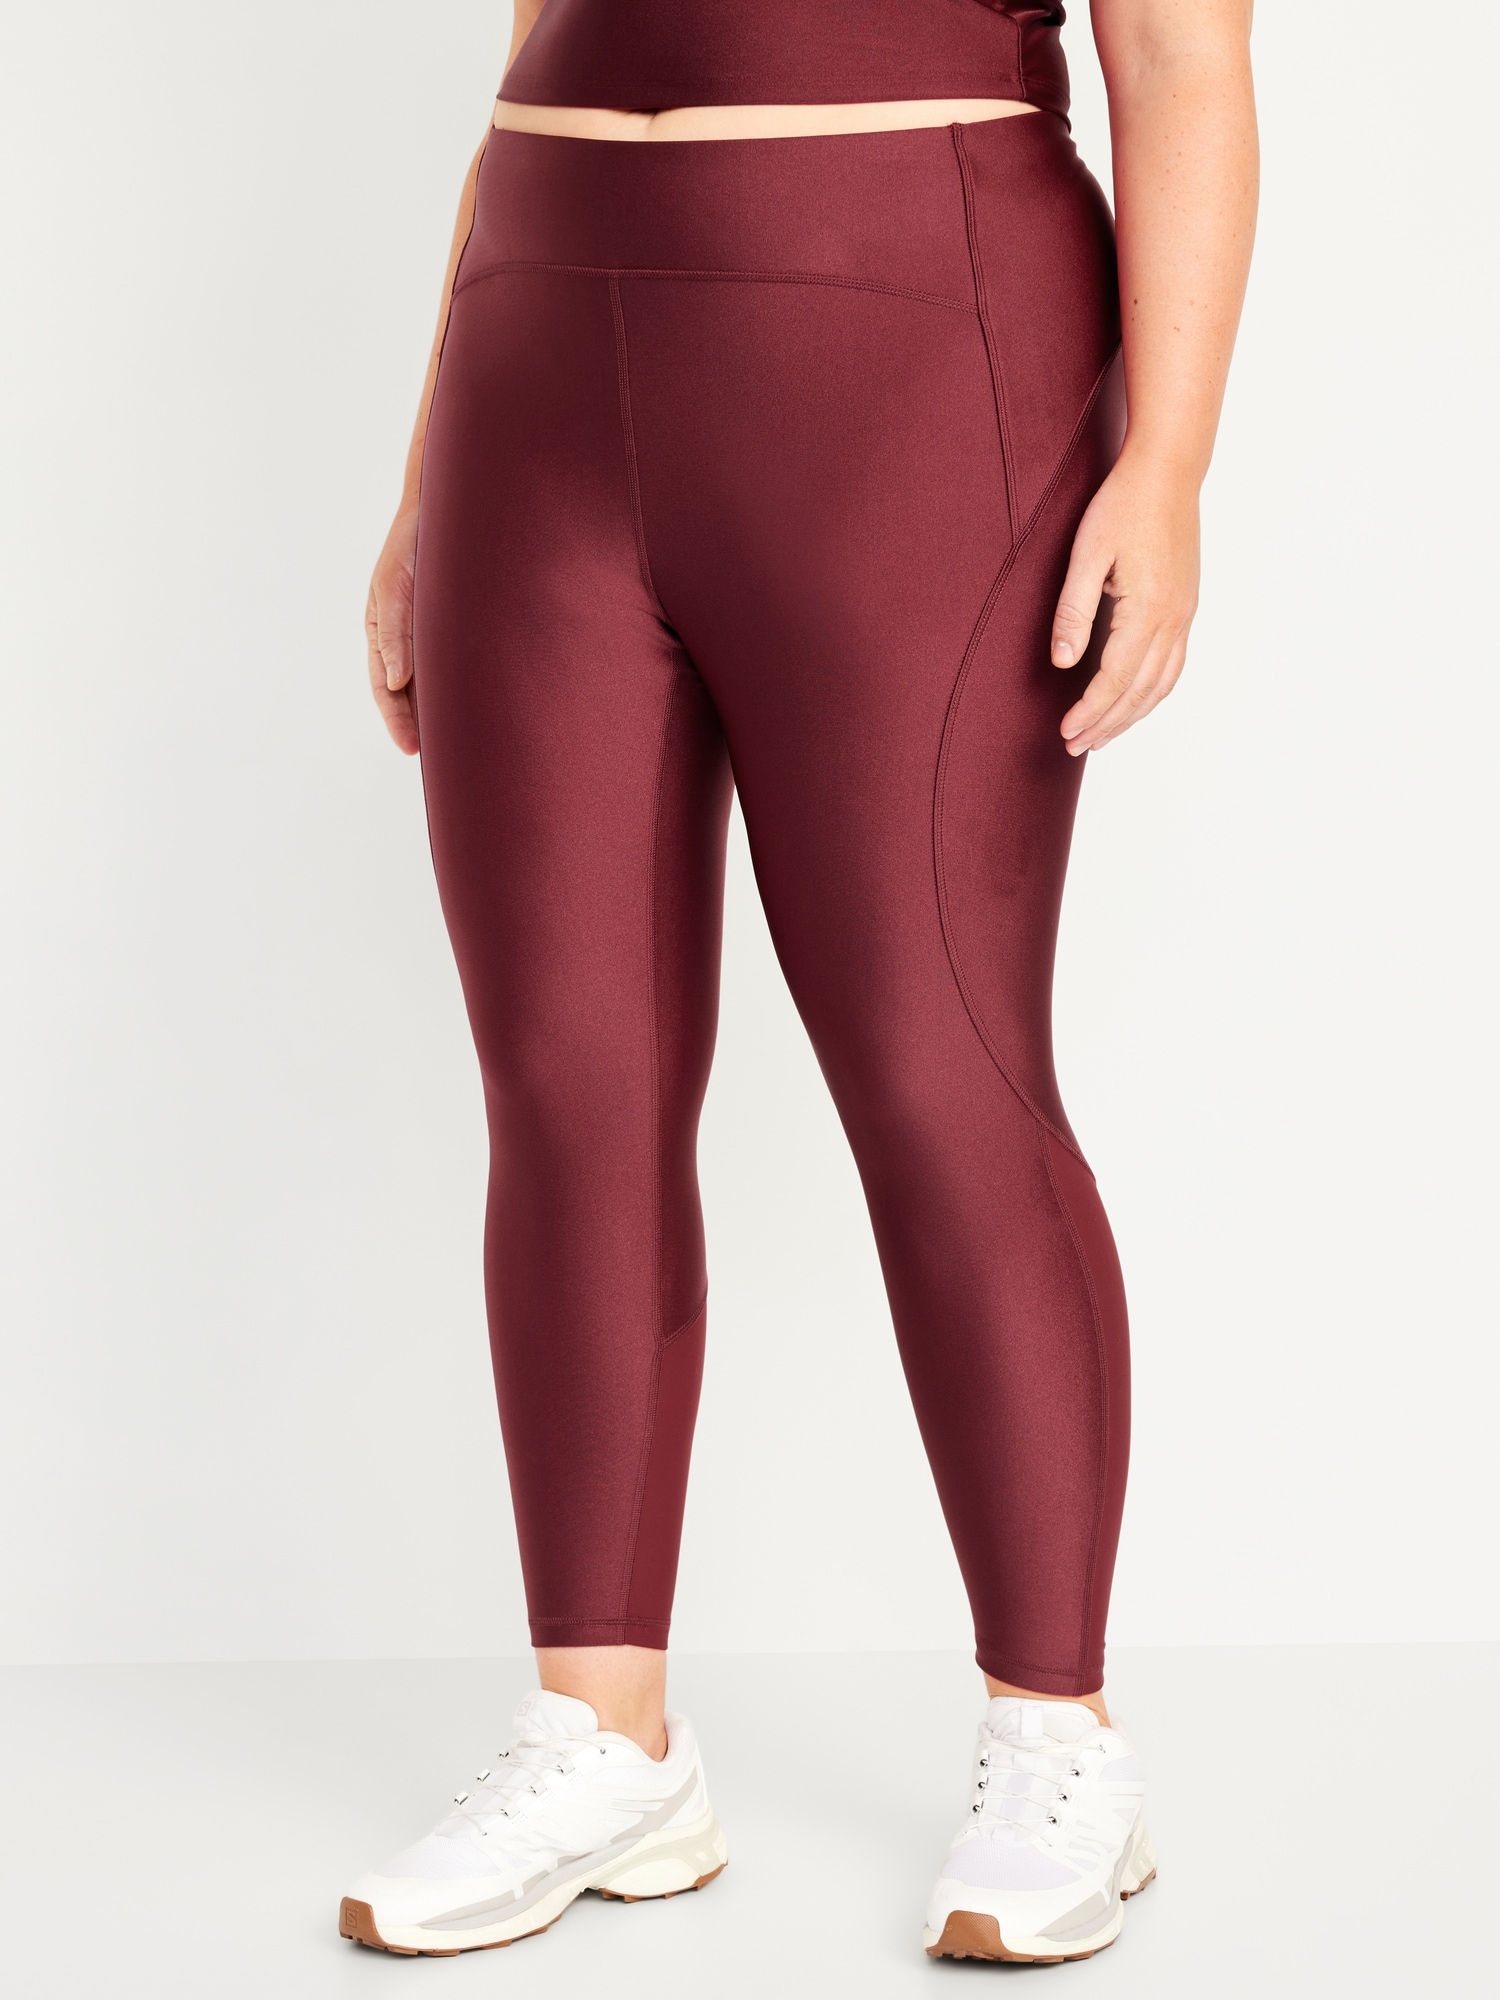 The 7 Best Old Navy Leggings For Every Type of Workout